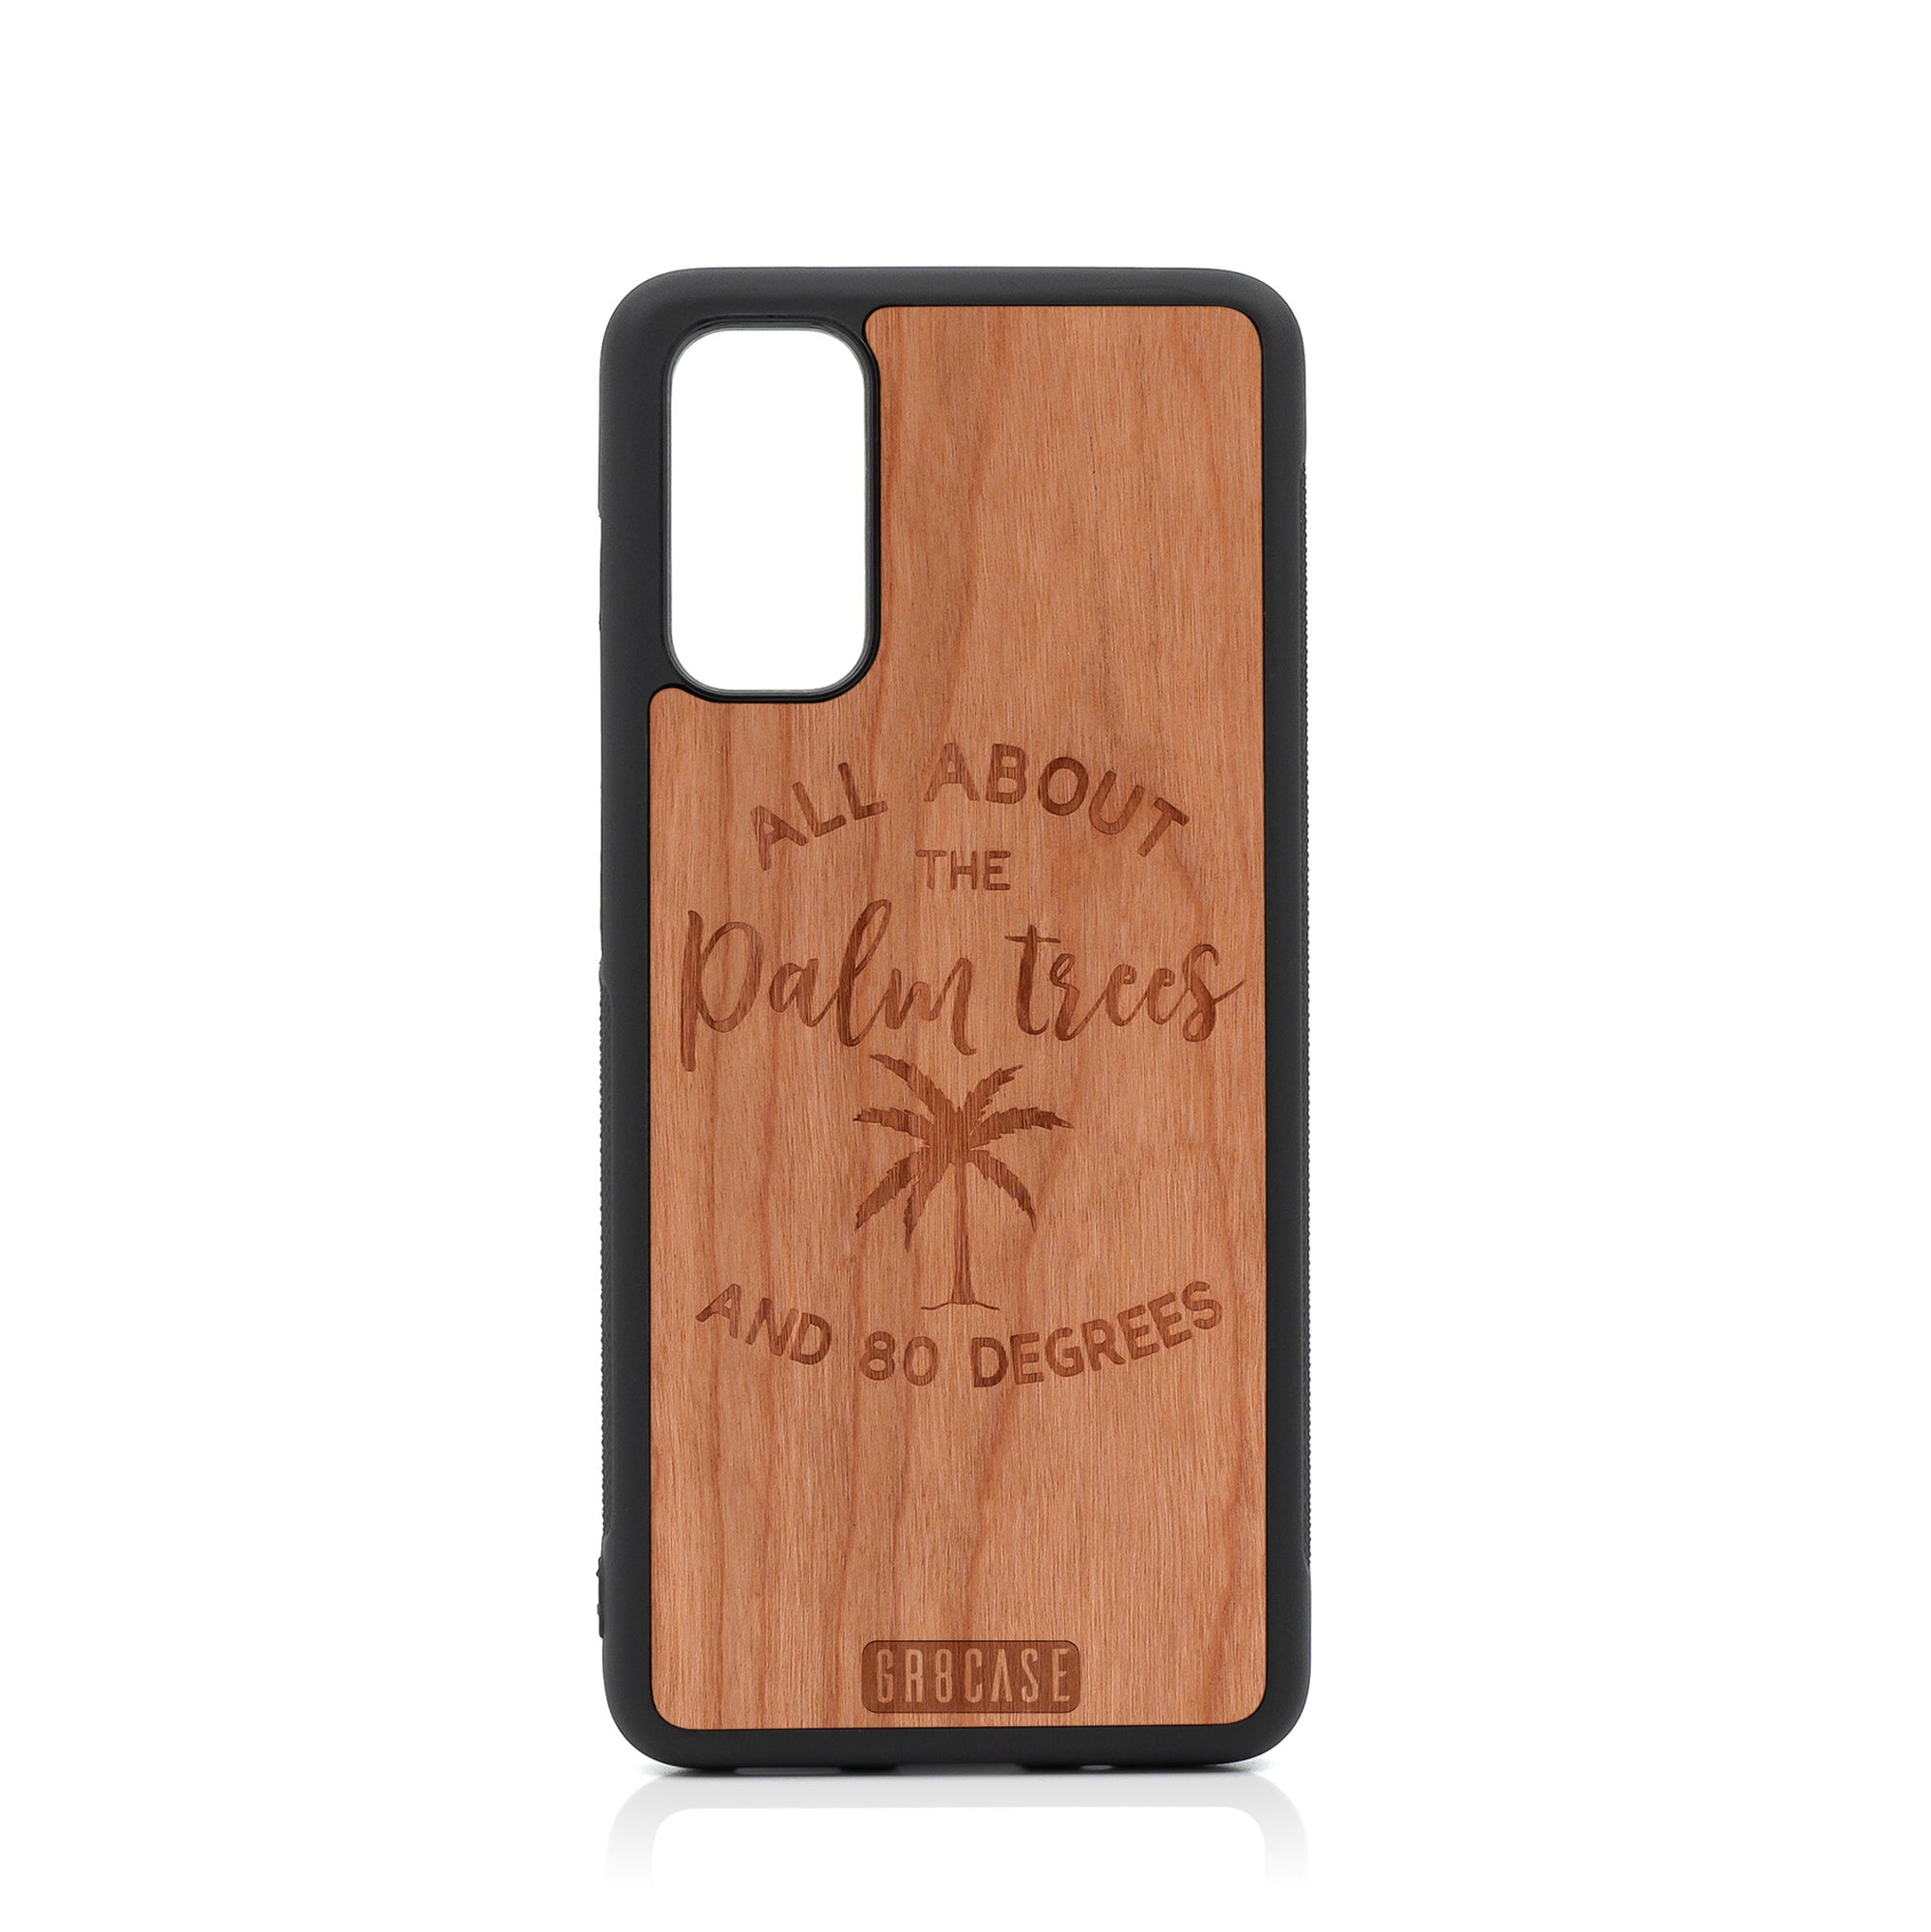 All About The Palm Trees and 80 Degrees Design Wood Case For Samsung Galaxy S20 by GR8CASE